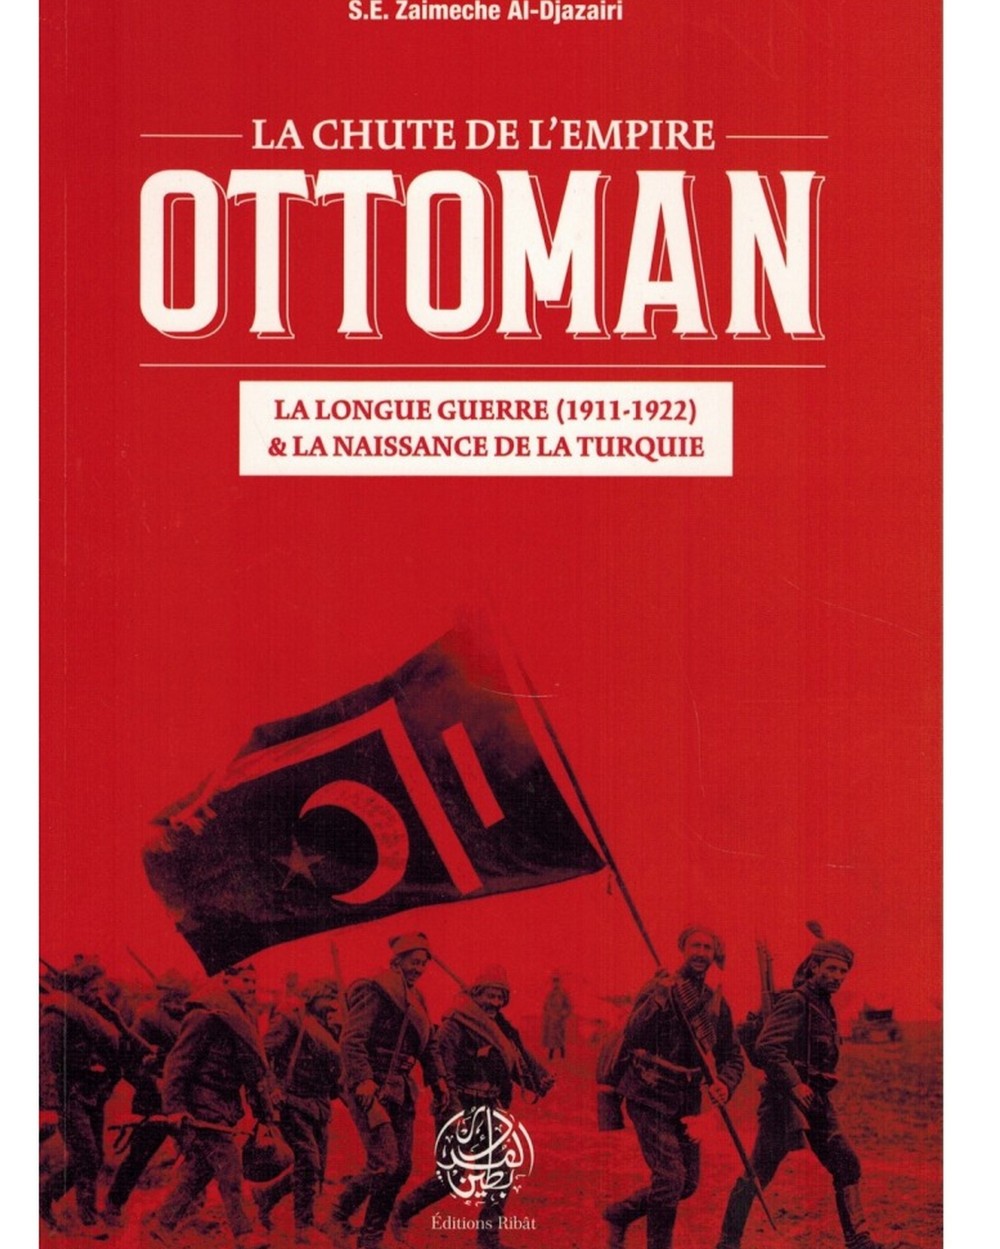 The fall of the Ottoman Empire